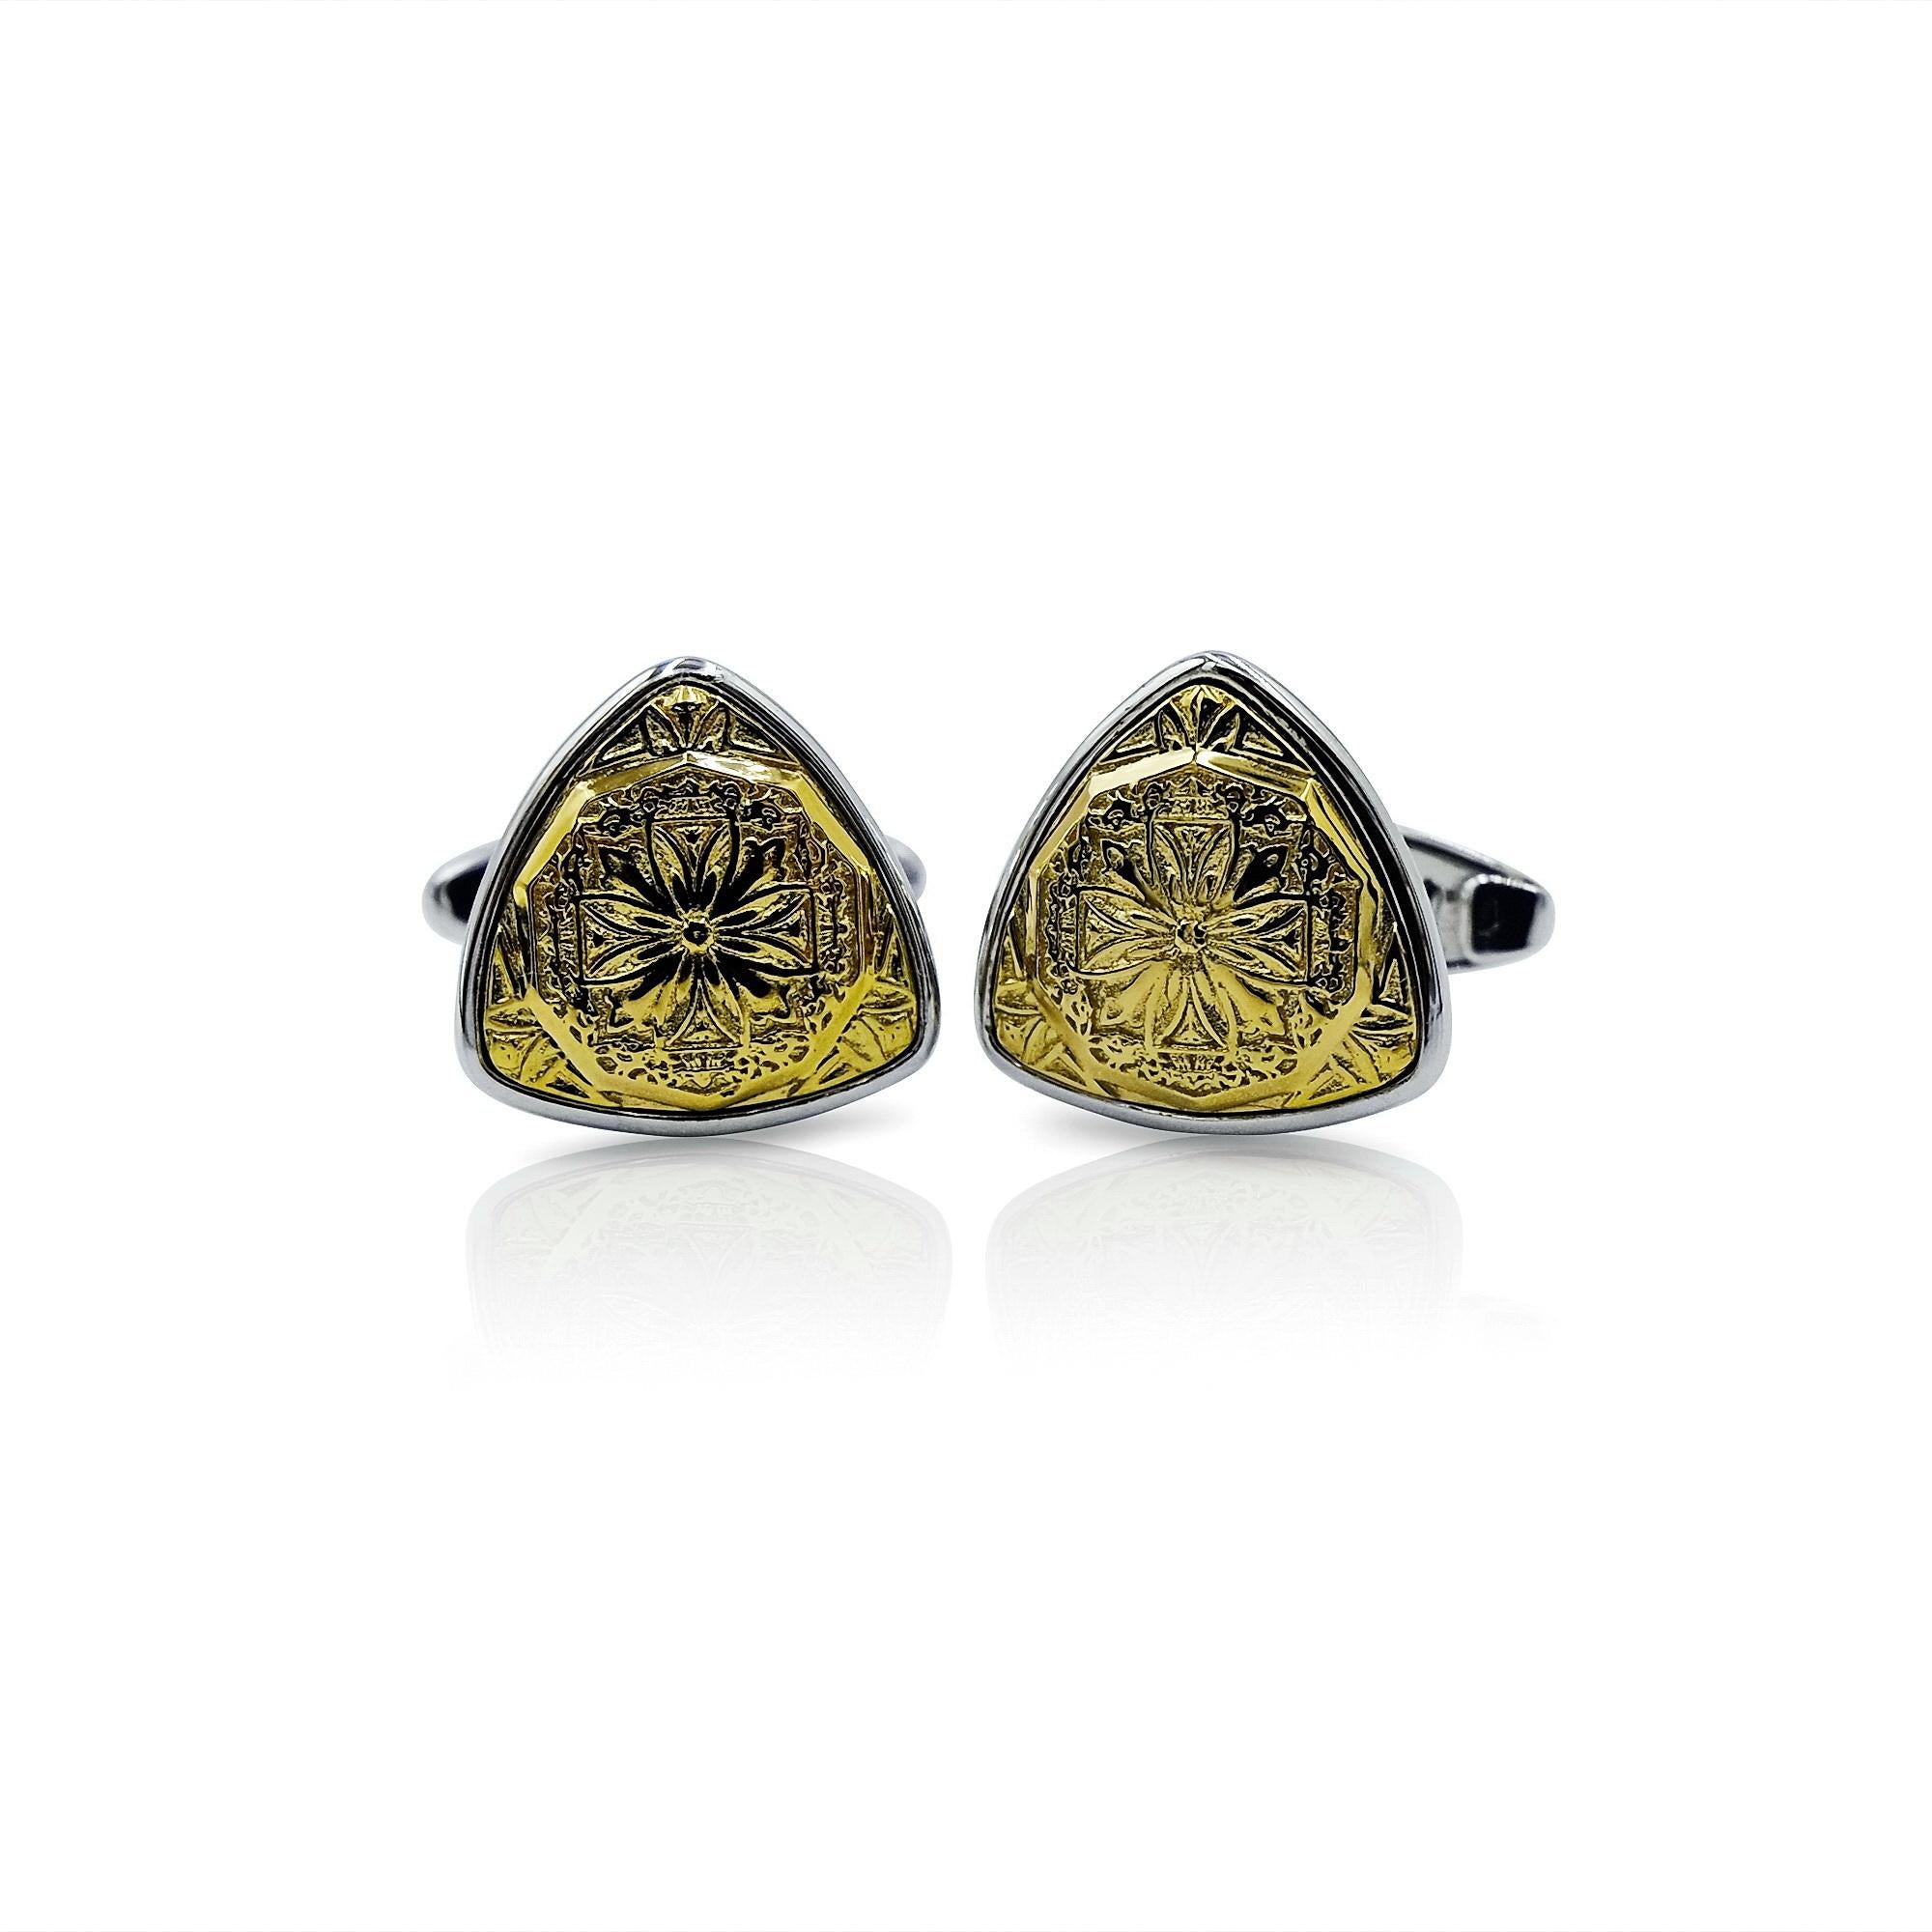 Luca Jouel Decorative Cufflinks Trio in Yellow Gold and Silver For Sale 1